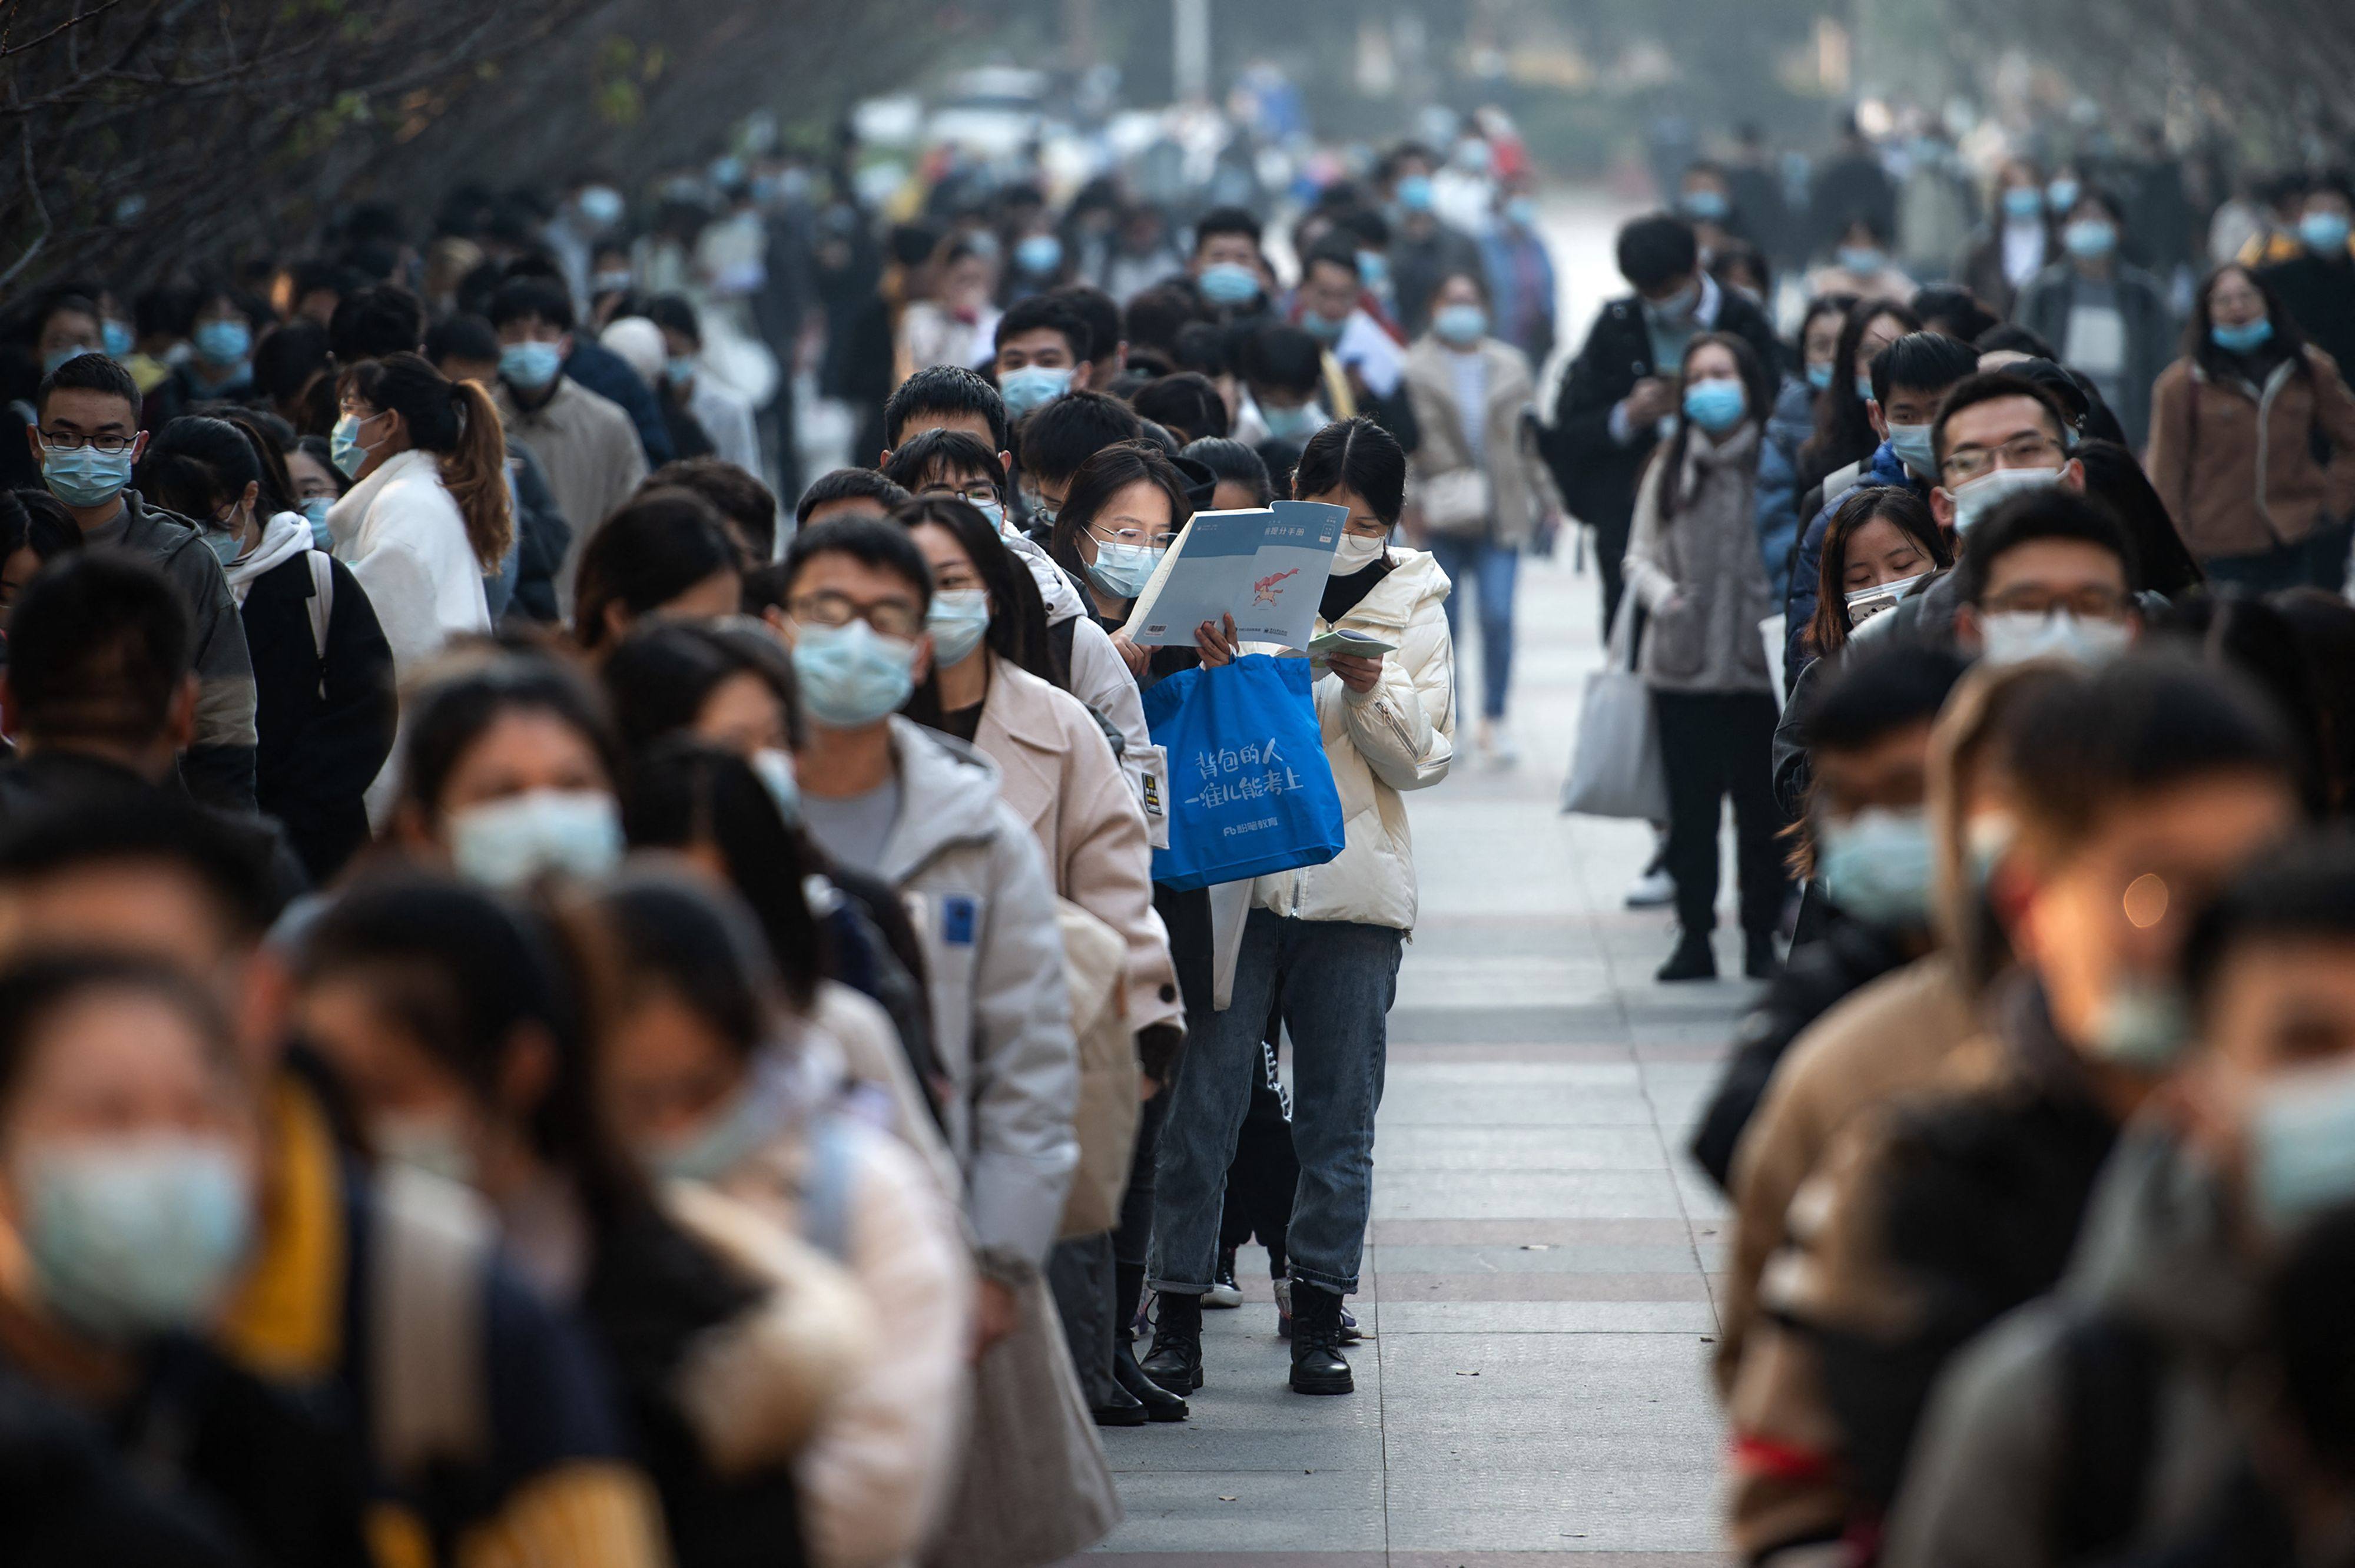 Candidates queue to take the exam for admission to the civil service in Wuhan on November 28, 2021. Civil service jobs have become highly coveted among young people in recent years amid an increasingly tight job market. Photo: AFP